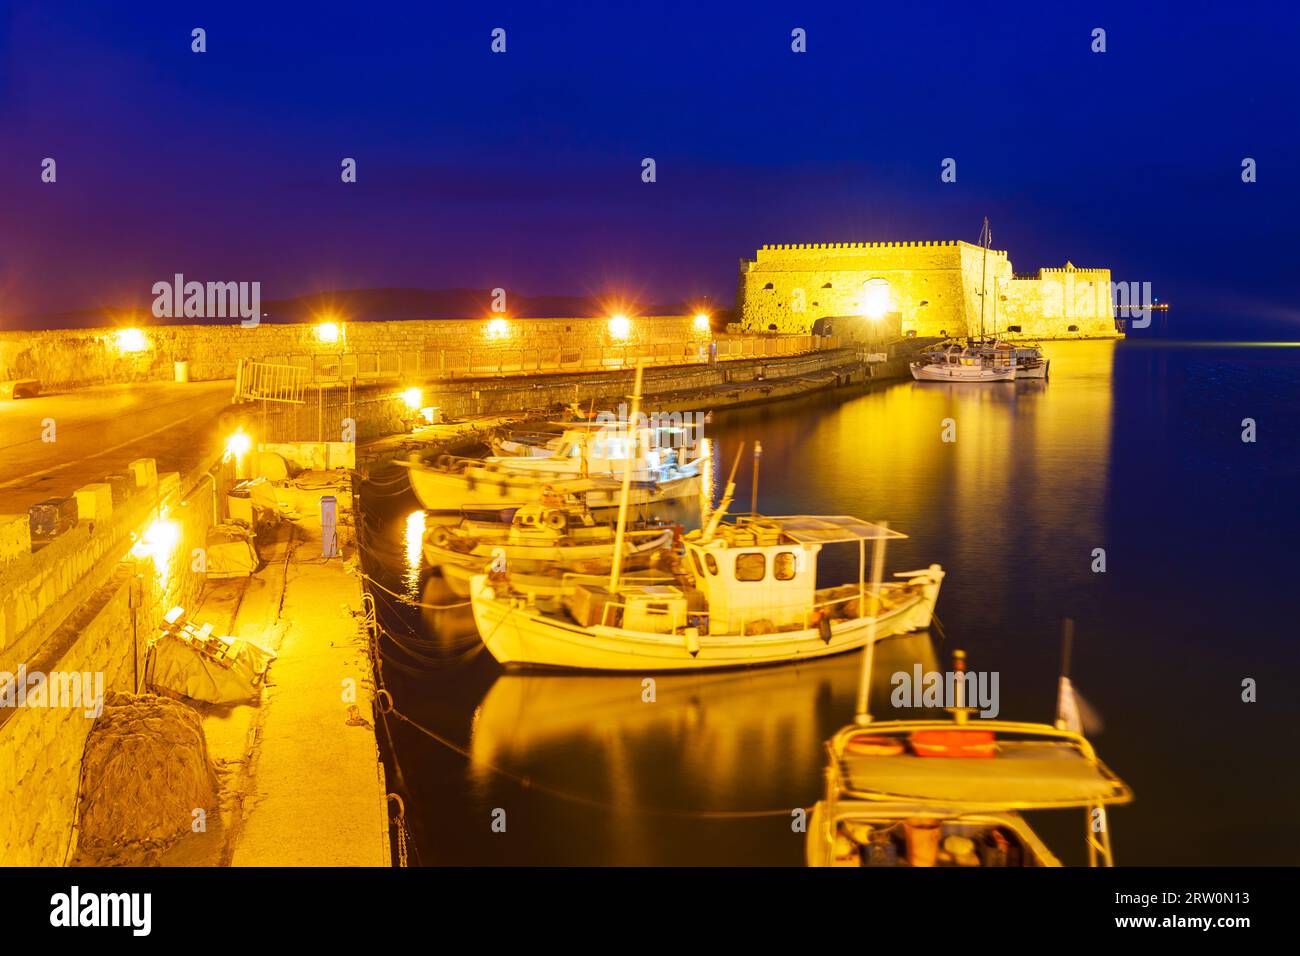 The Koules or Castello a Mare is a fortress at the entrance of the old port of Heraklion city, Crete island in Greece Stock Photo